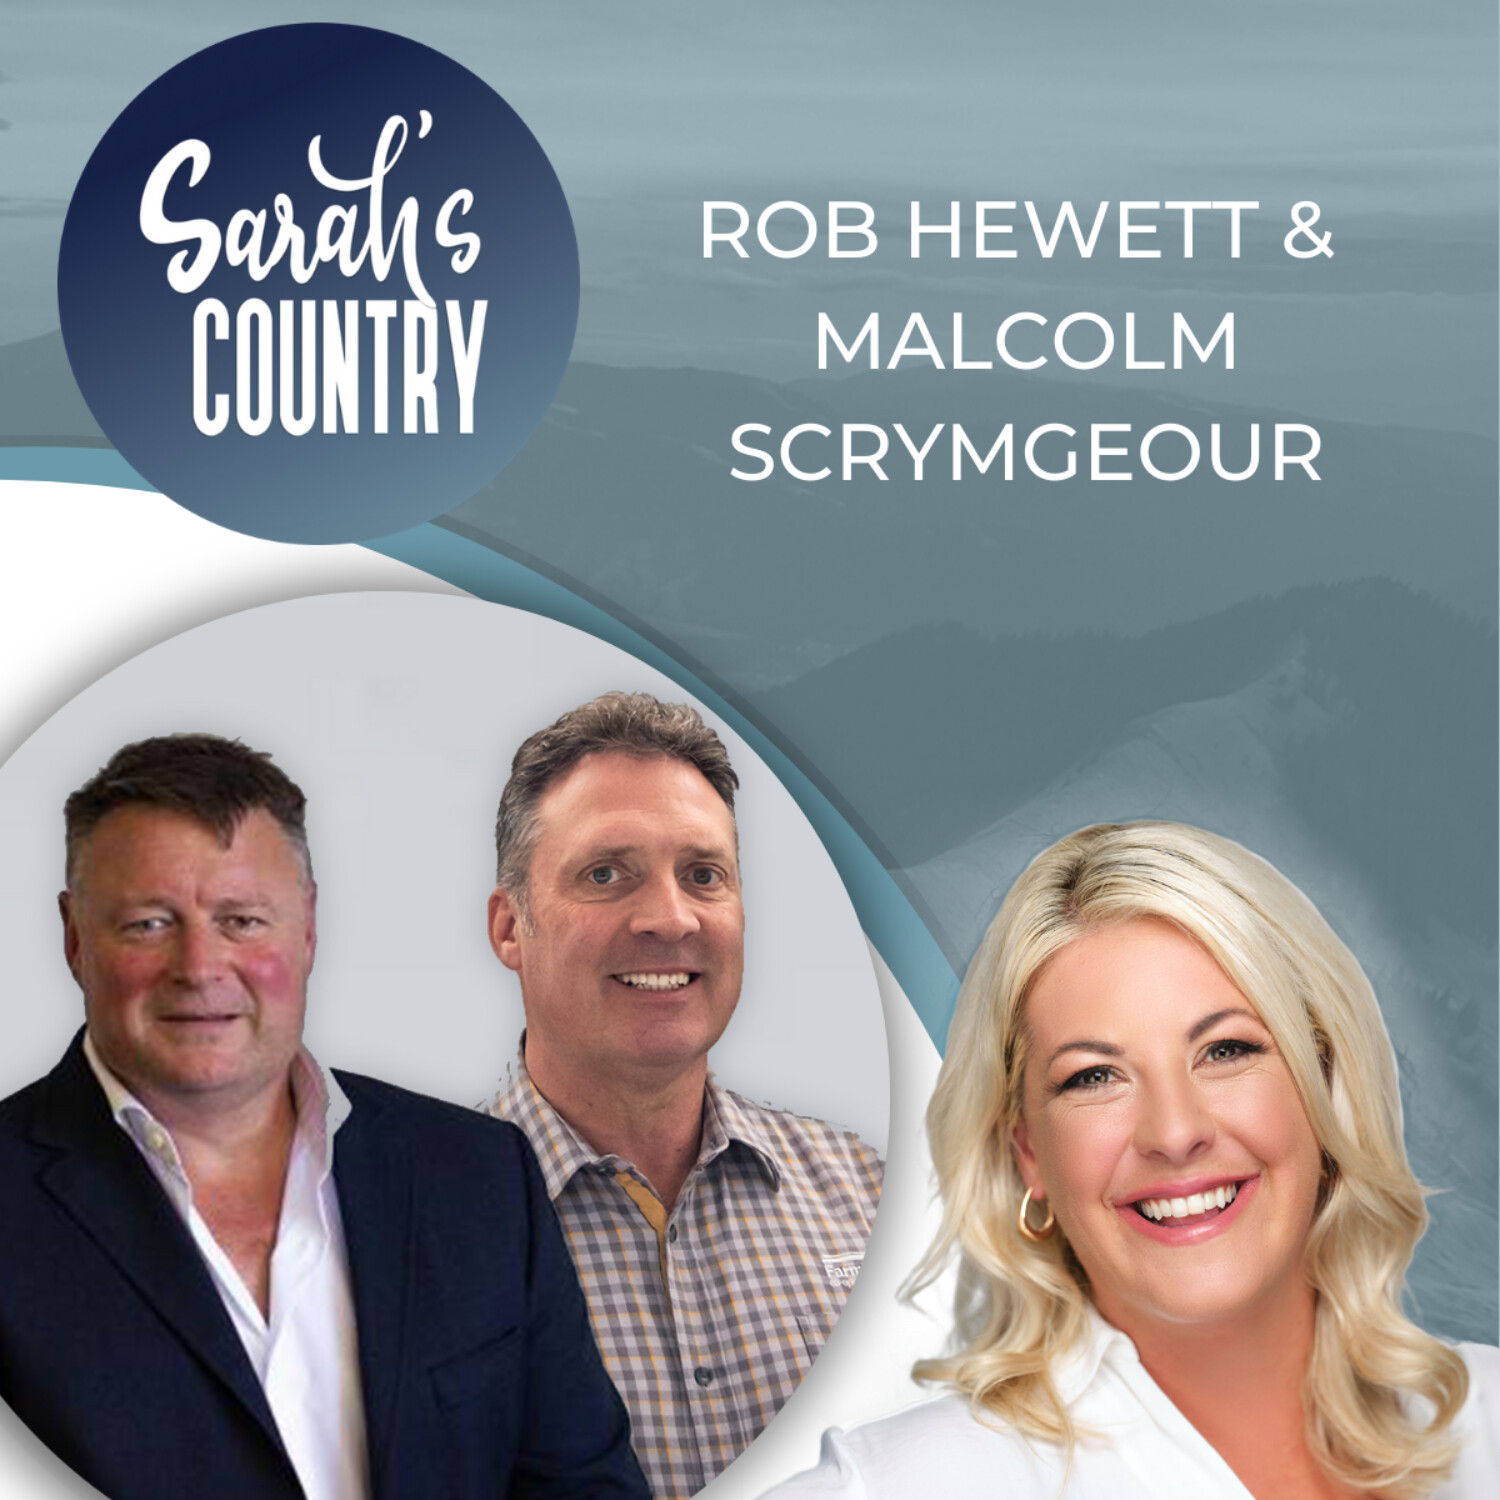 “2020 review and look ahead to 2021” with Rob Hewett & Malcolm Scrymgeour